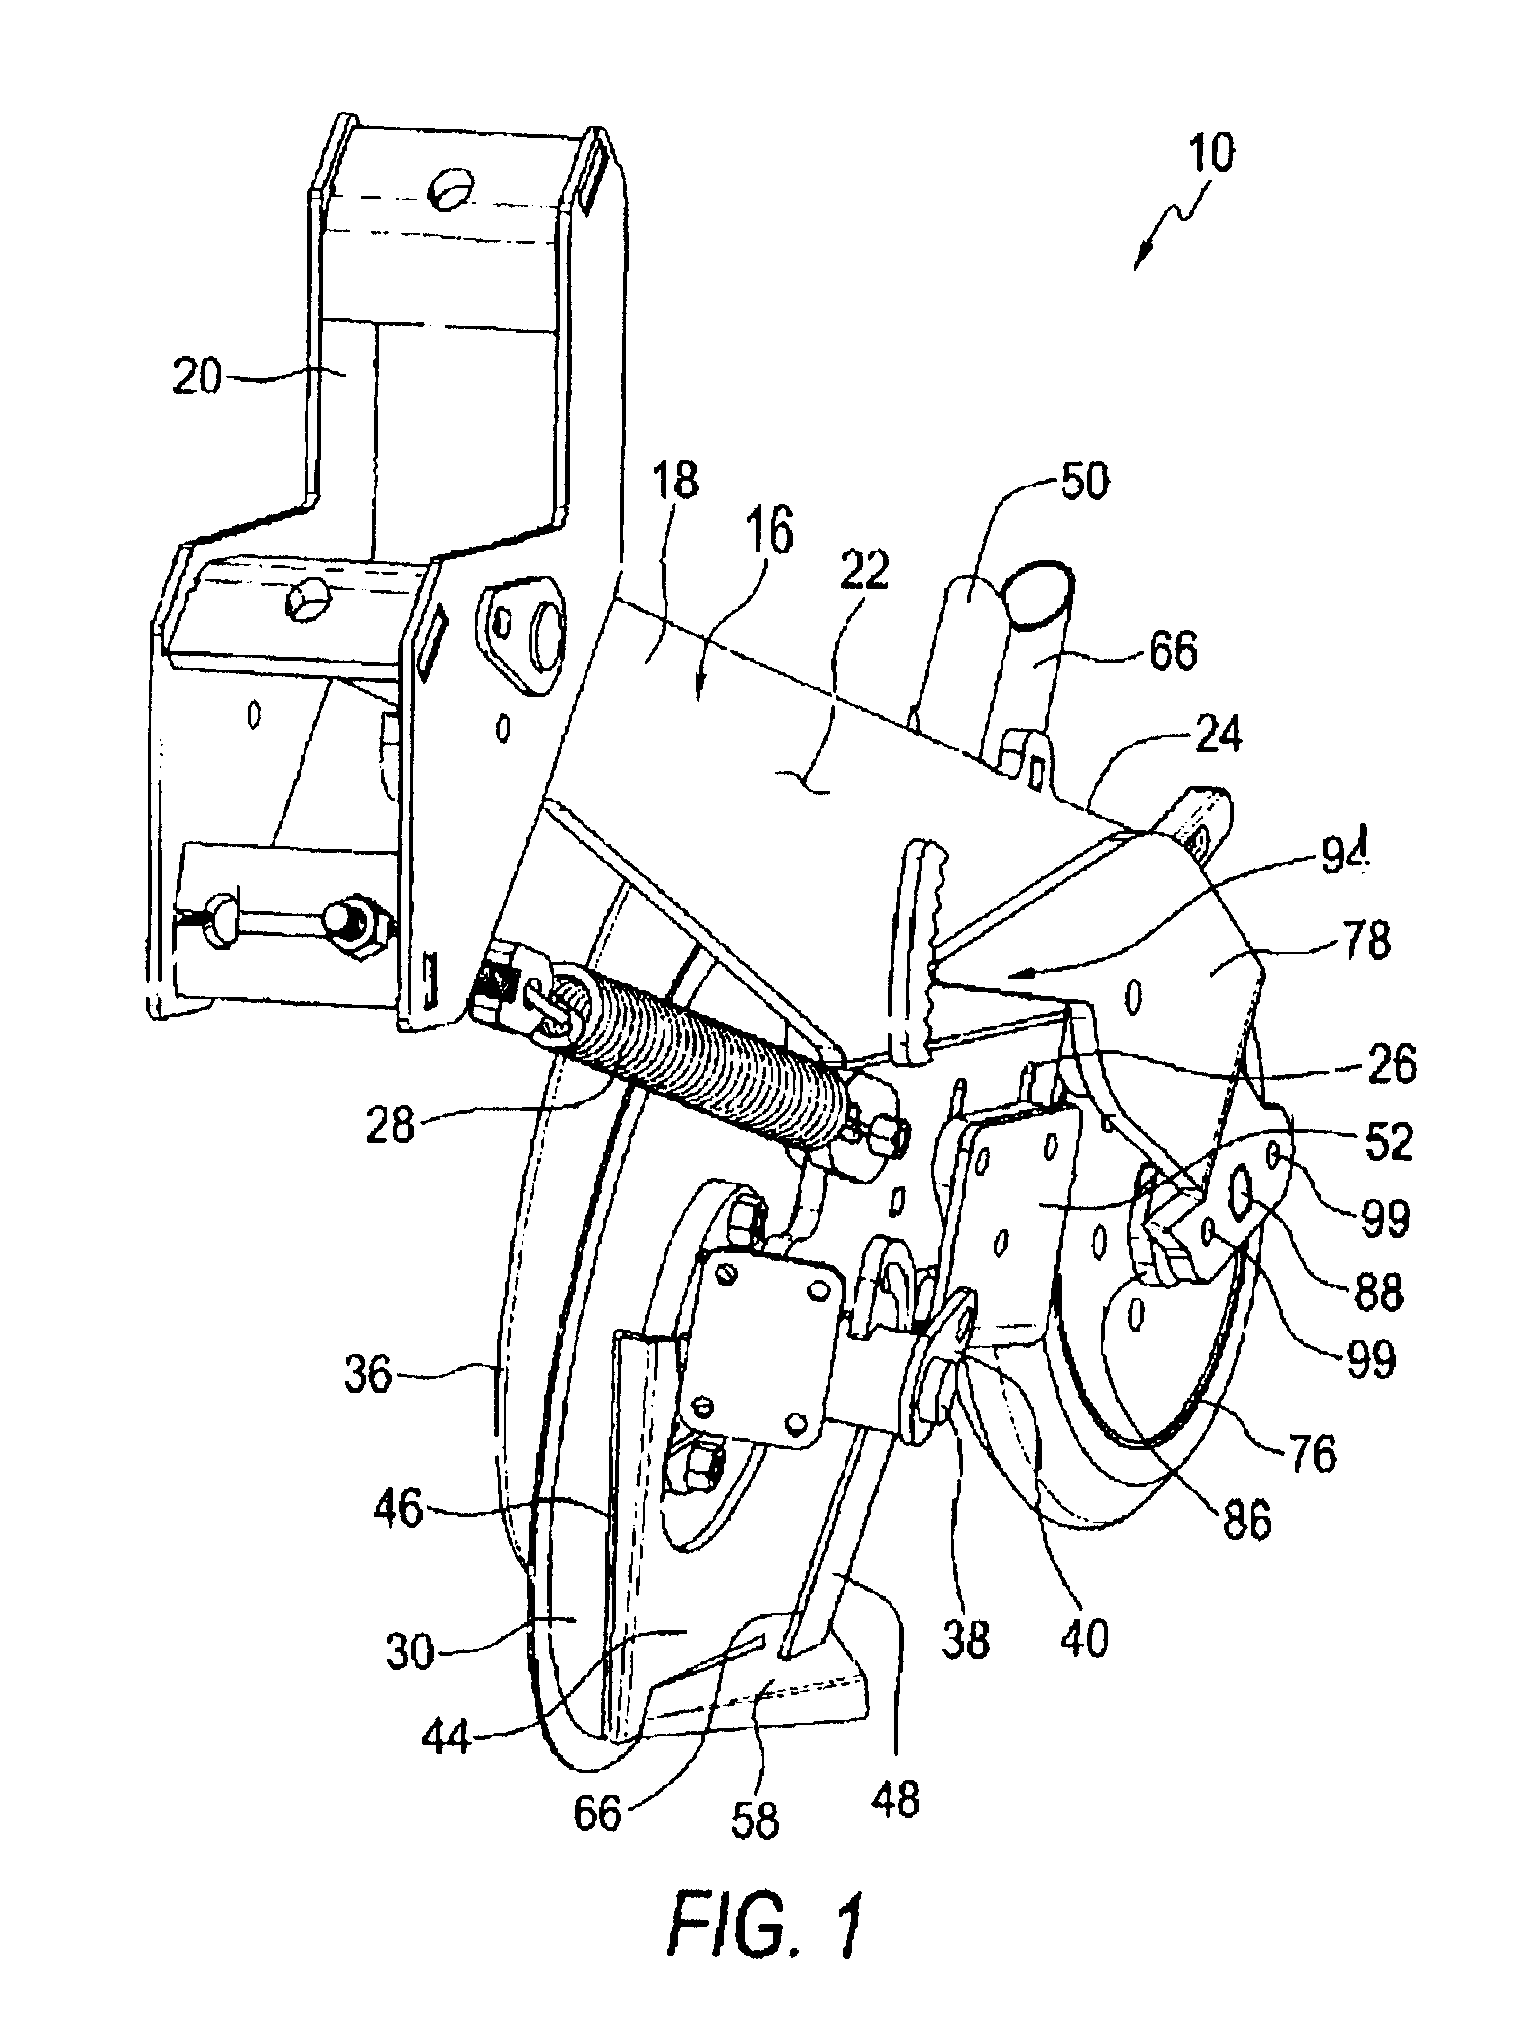 Furrow opener apparatus with two way depth control